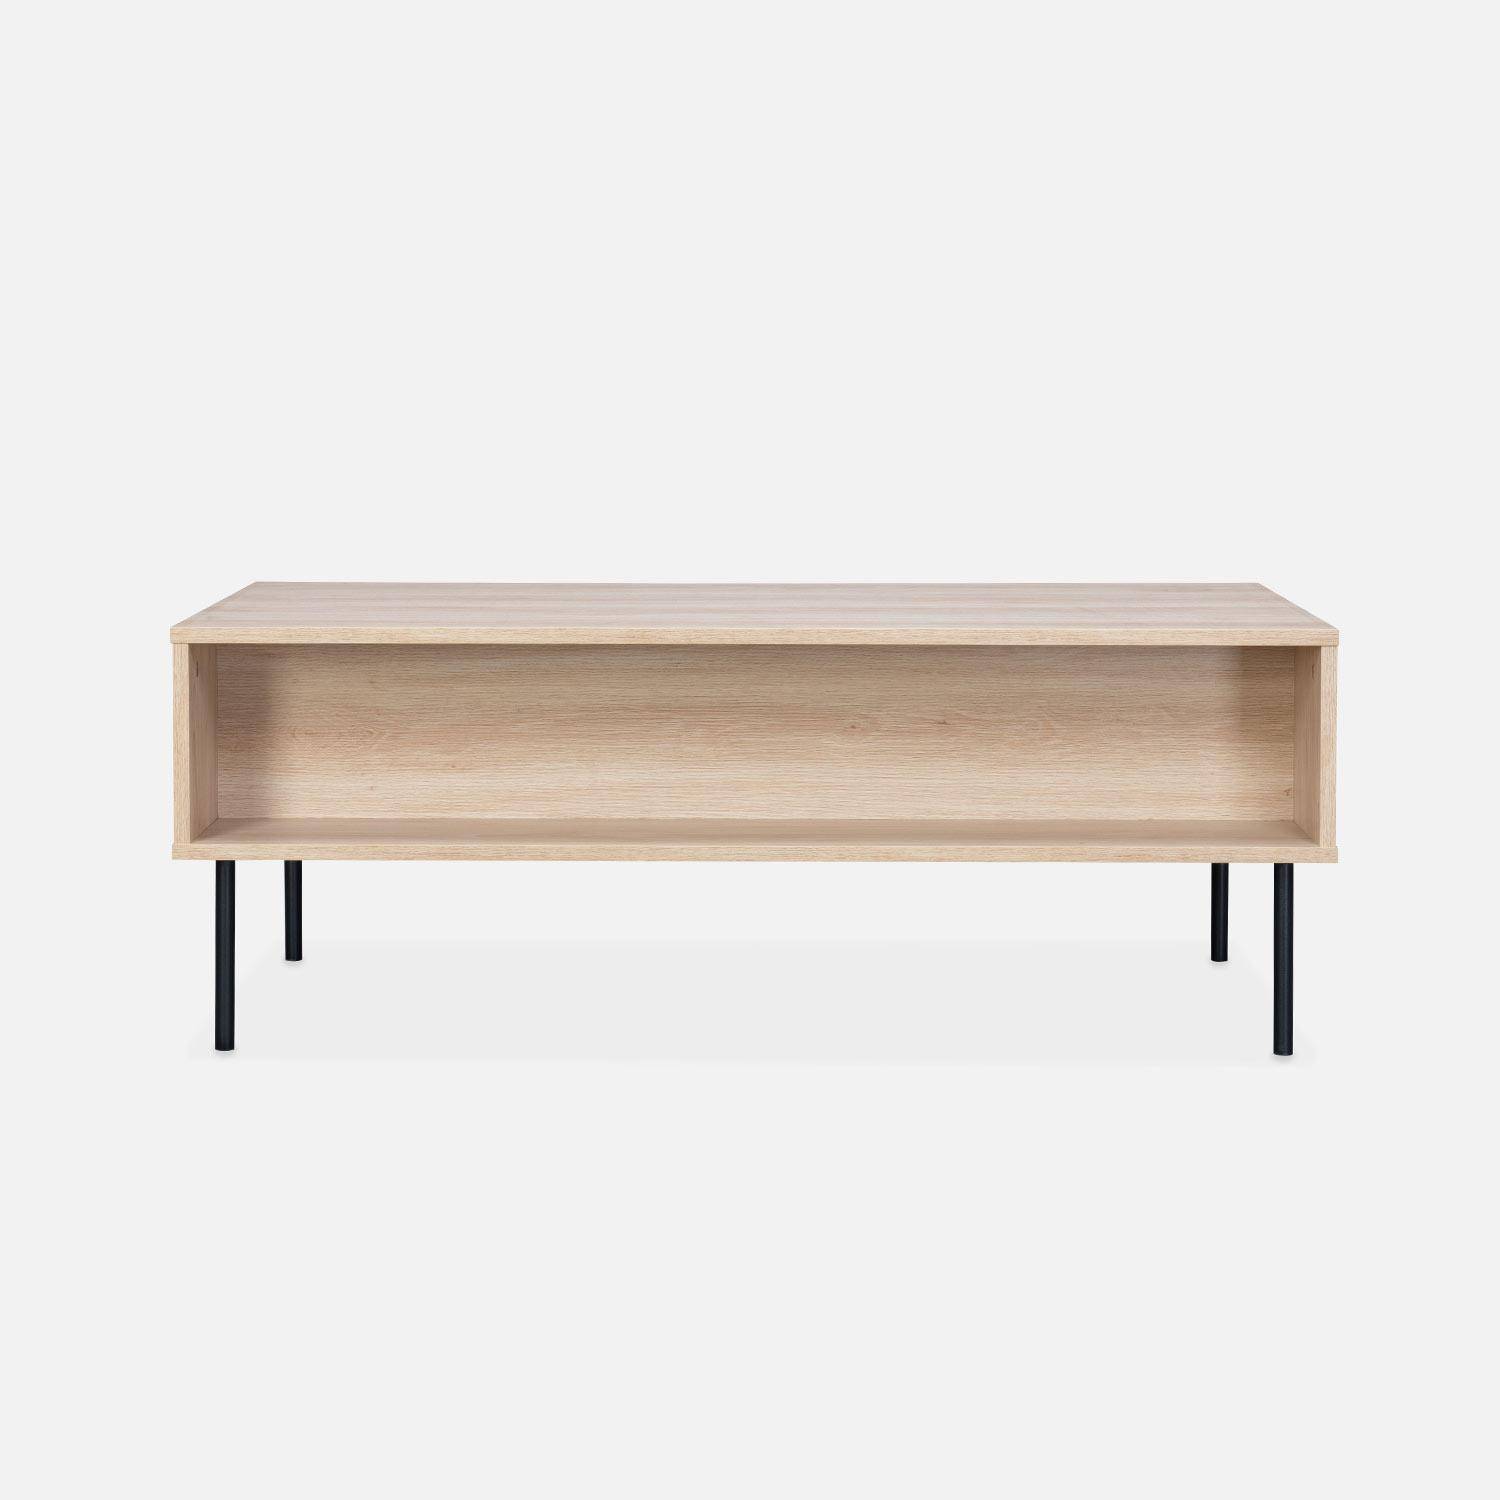 Grooved wood-effect coffee table with one drawer and storage nook, 110x59x41cm - Braga - Natural,sweeek,Photo5